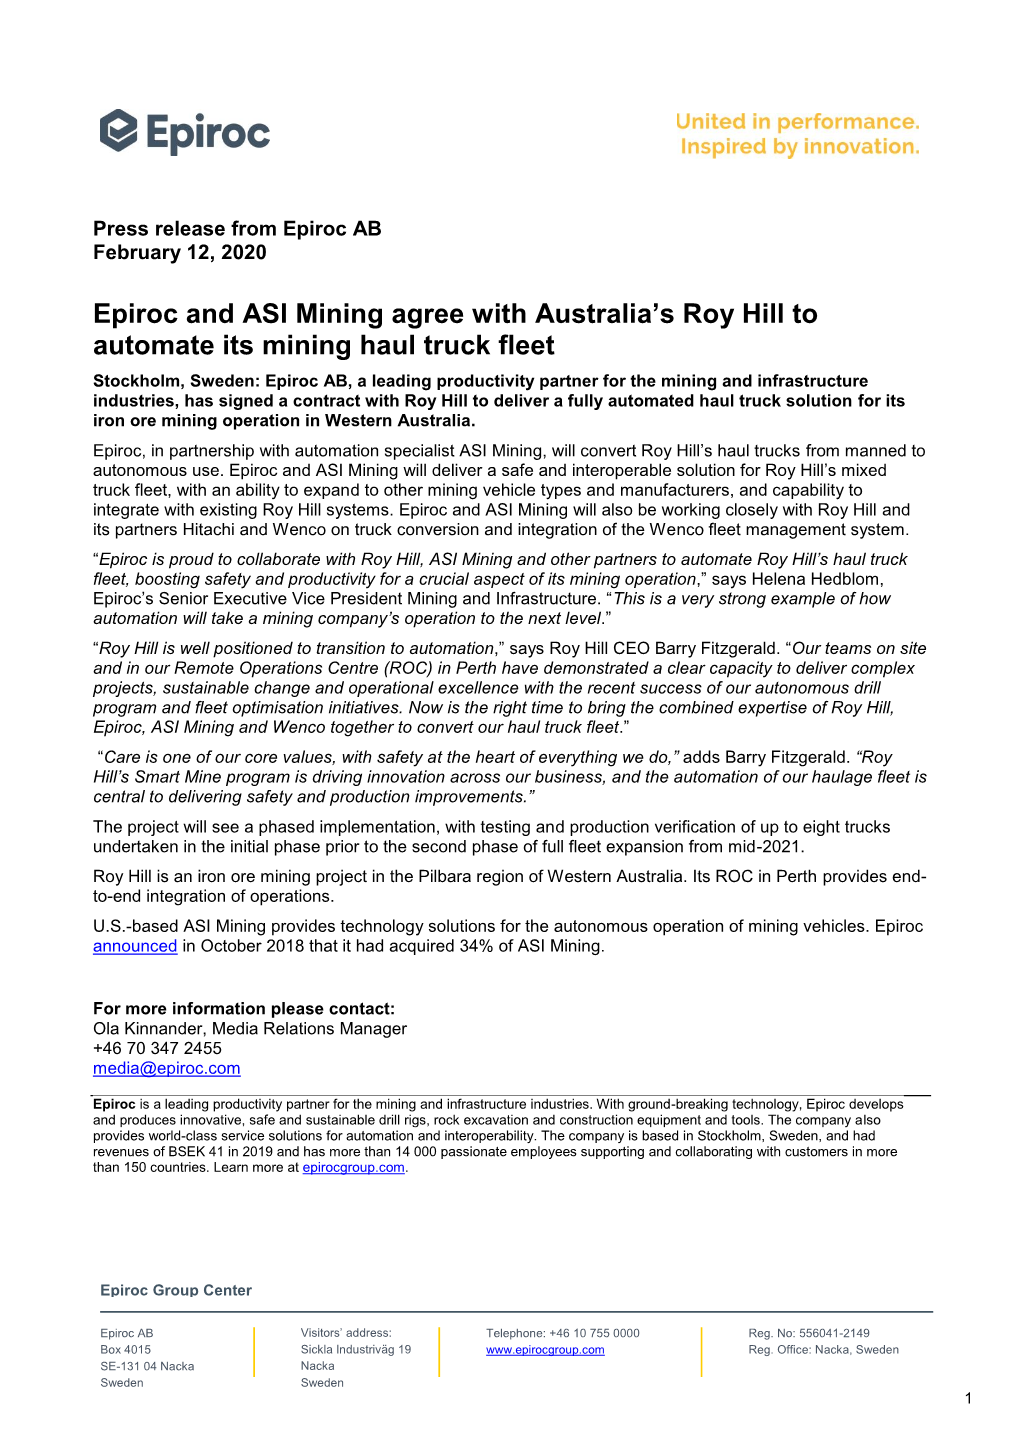 Epiroc and ASI Mining Agree with Australia's Roy Hill to Automate Its